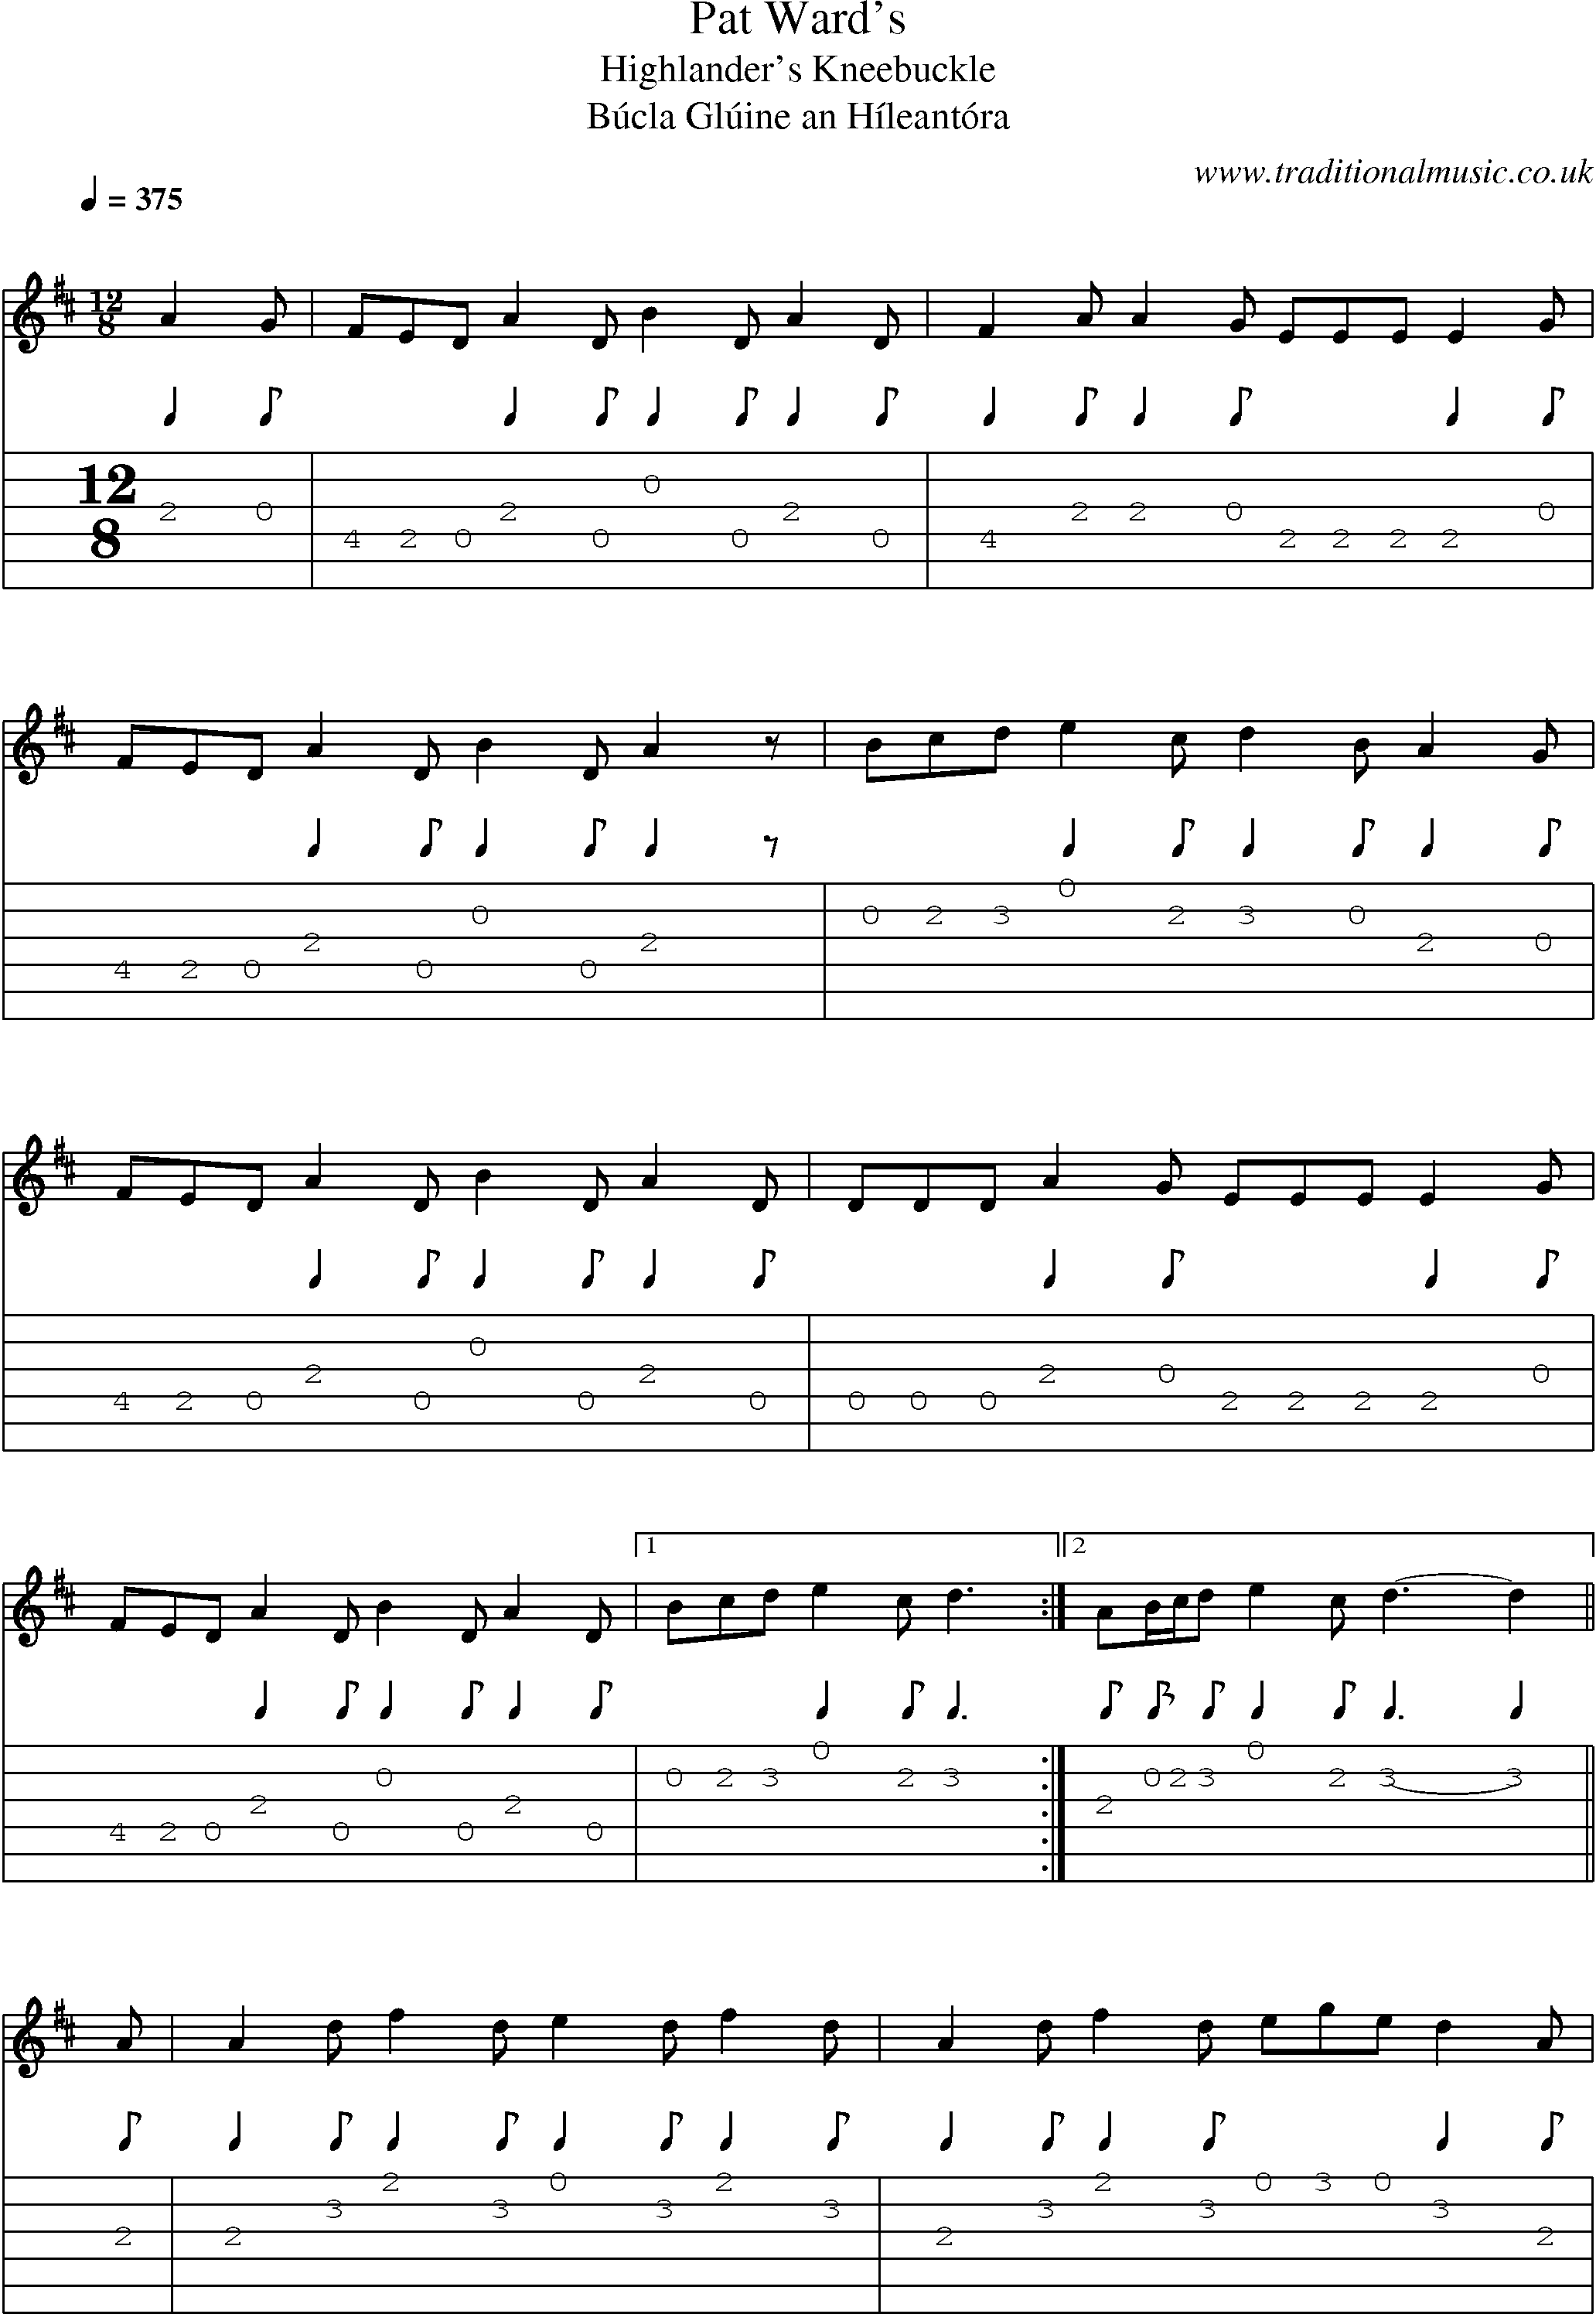 Music Score and Guitar Tabs for Pat Wards